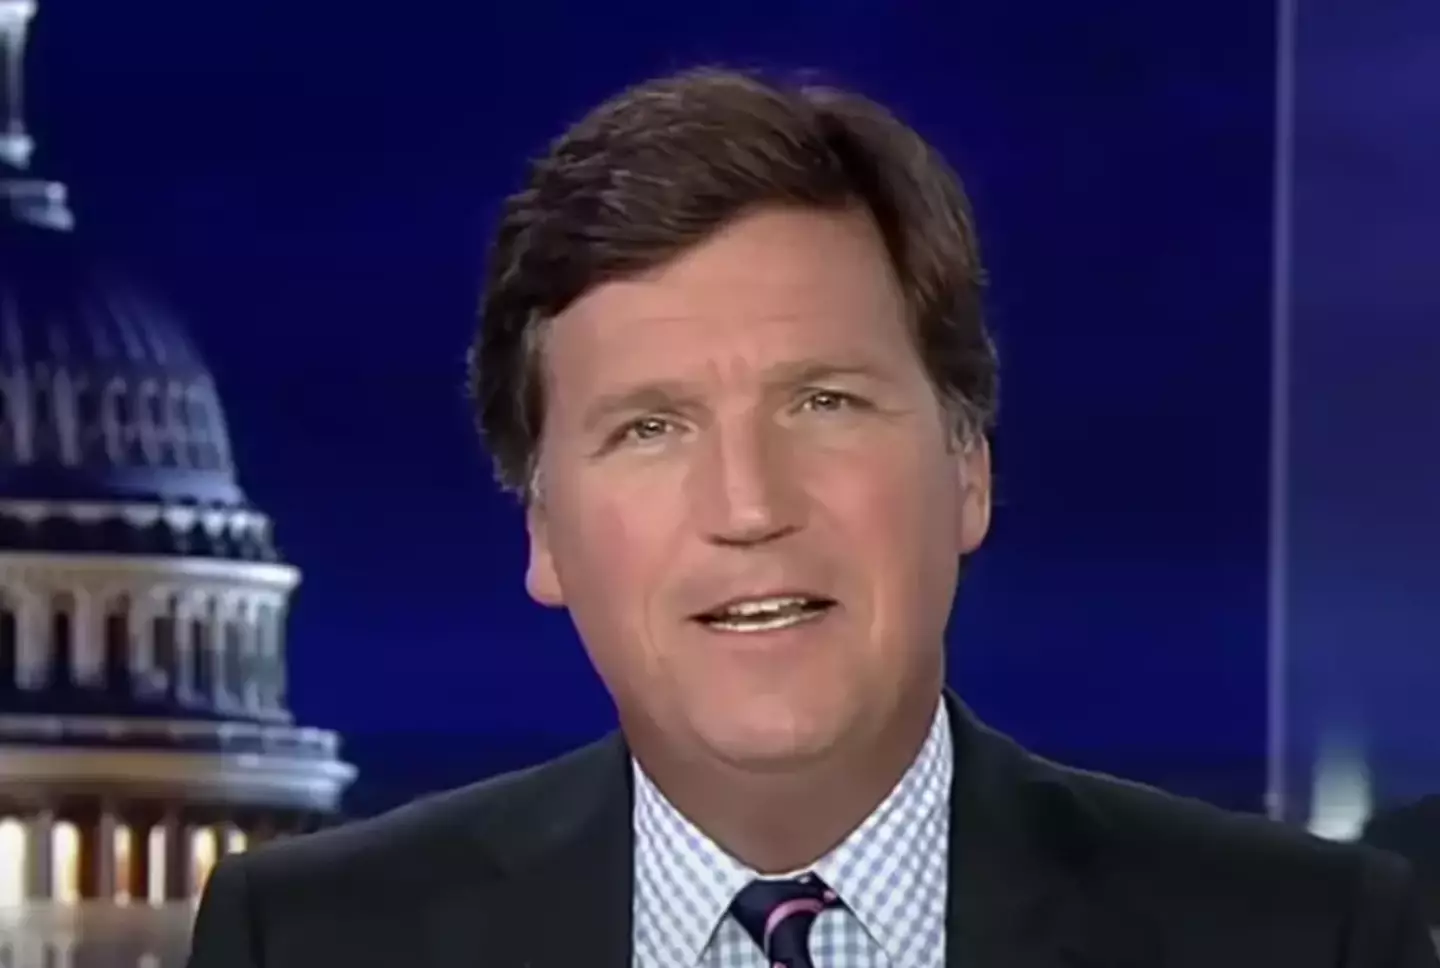 Tucker Carlson was recently let go from Fox News.